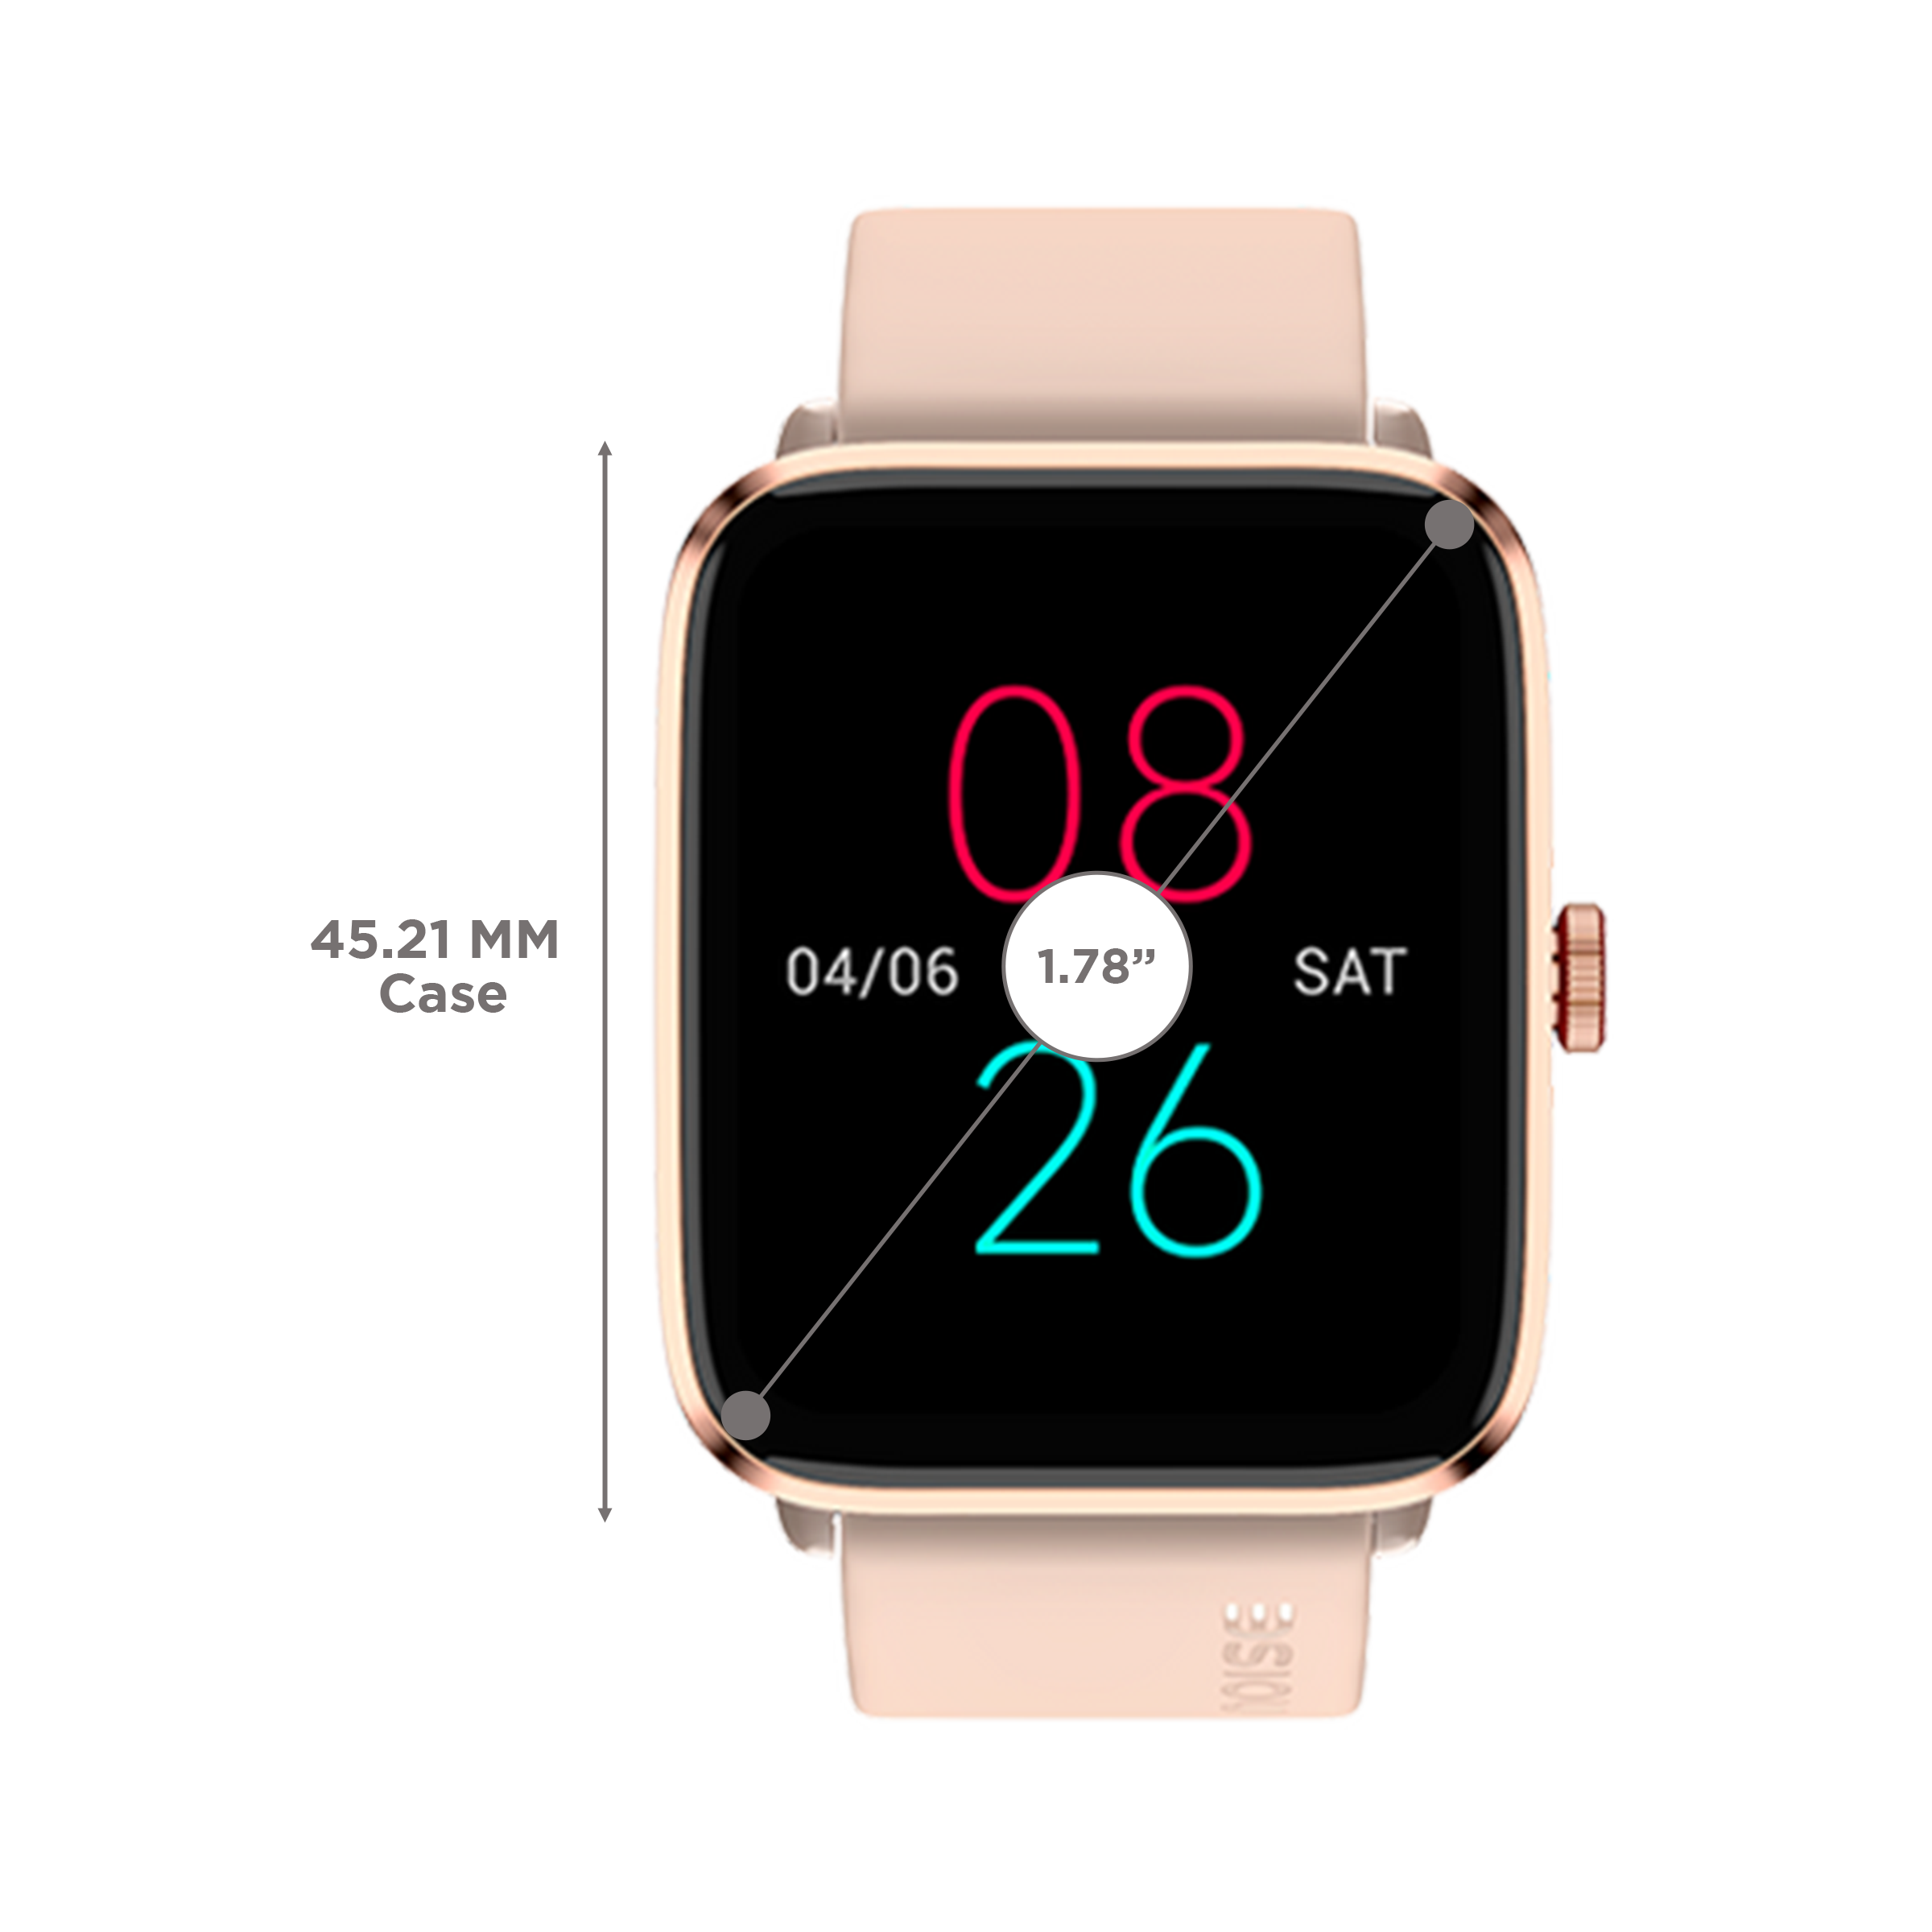 Noise Colorfit Pro 4 Alpha Smartwatch with Bluetooth Calling (45.21mm AMOLED Display, IP68 Water Resistant, Rose Pink Strap)_3